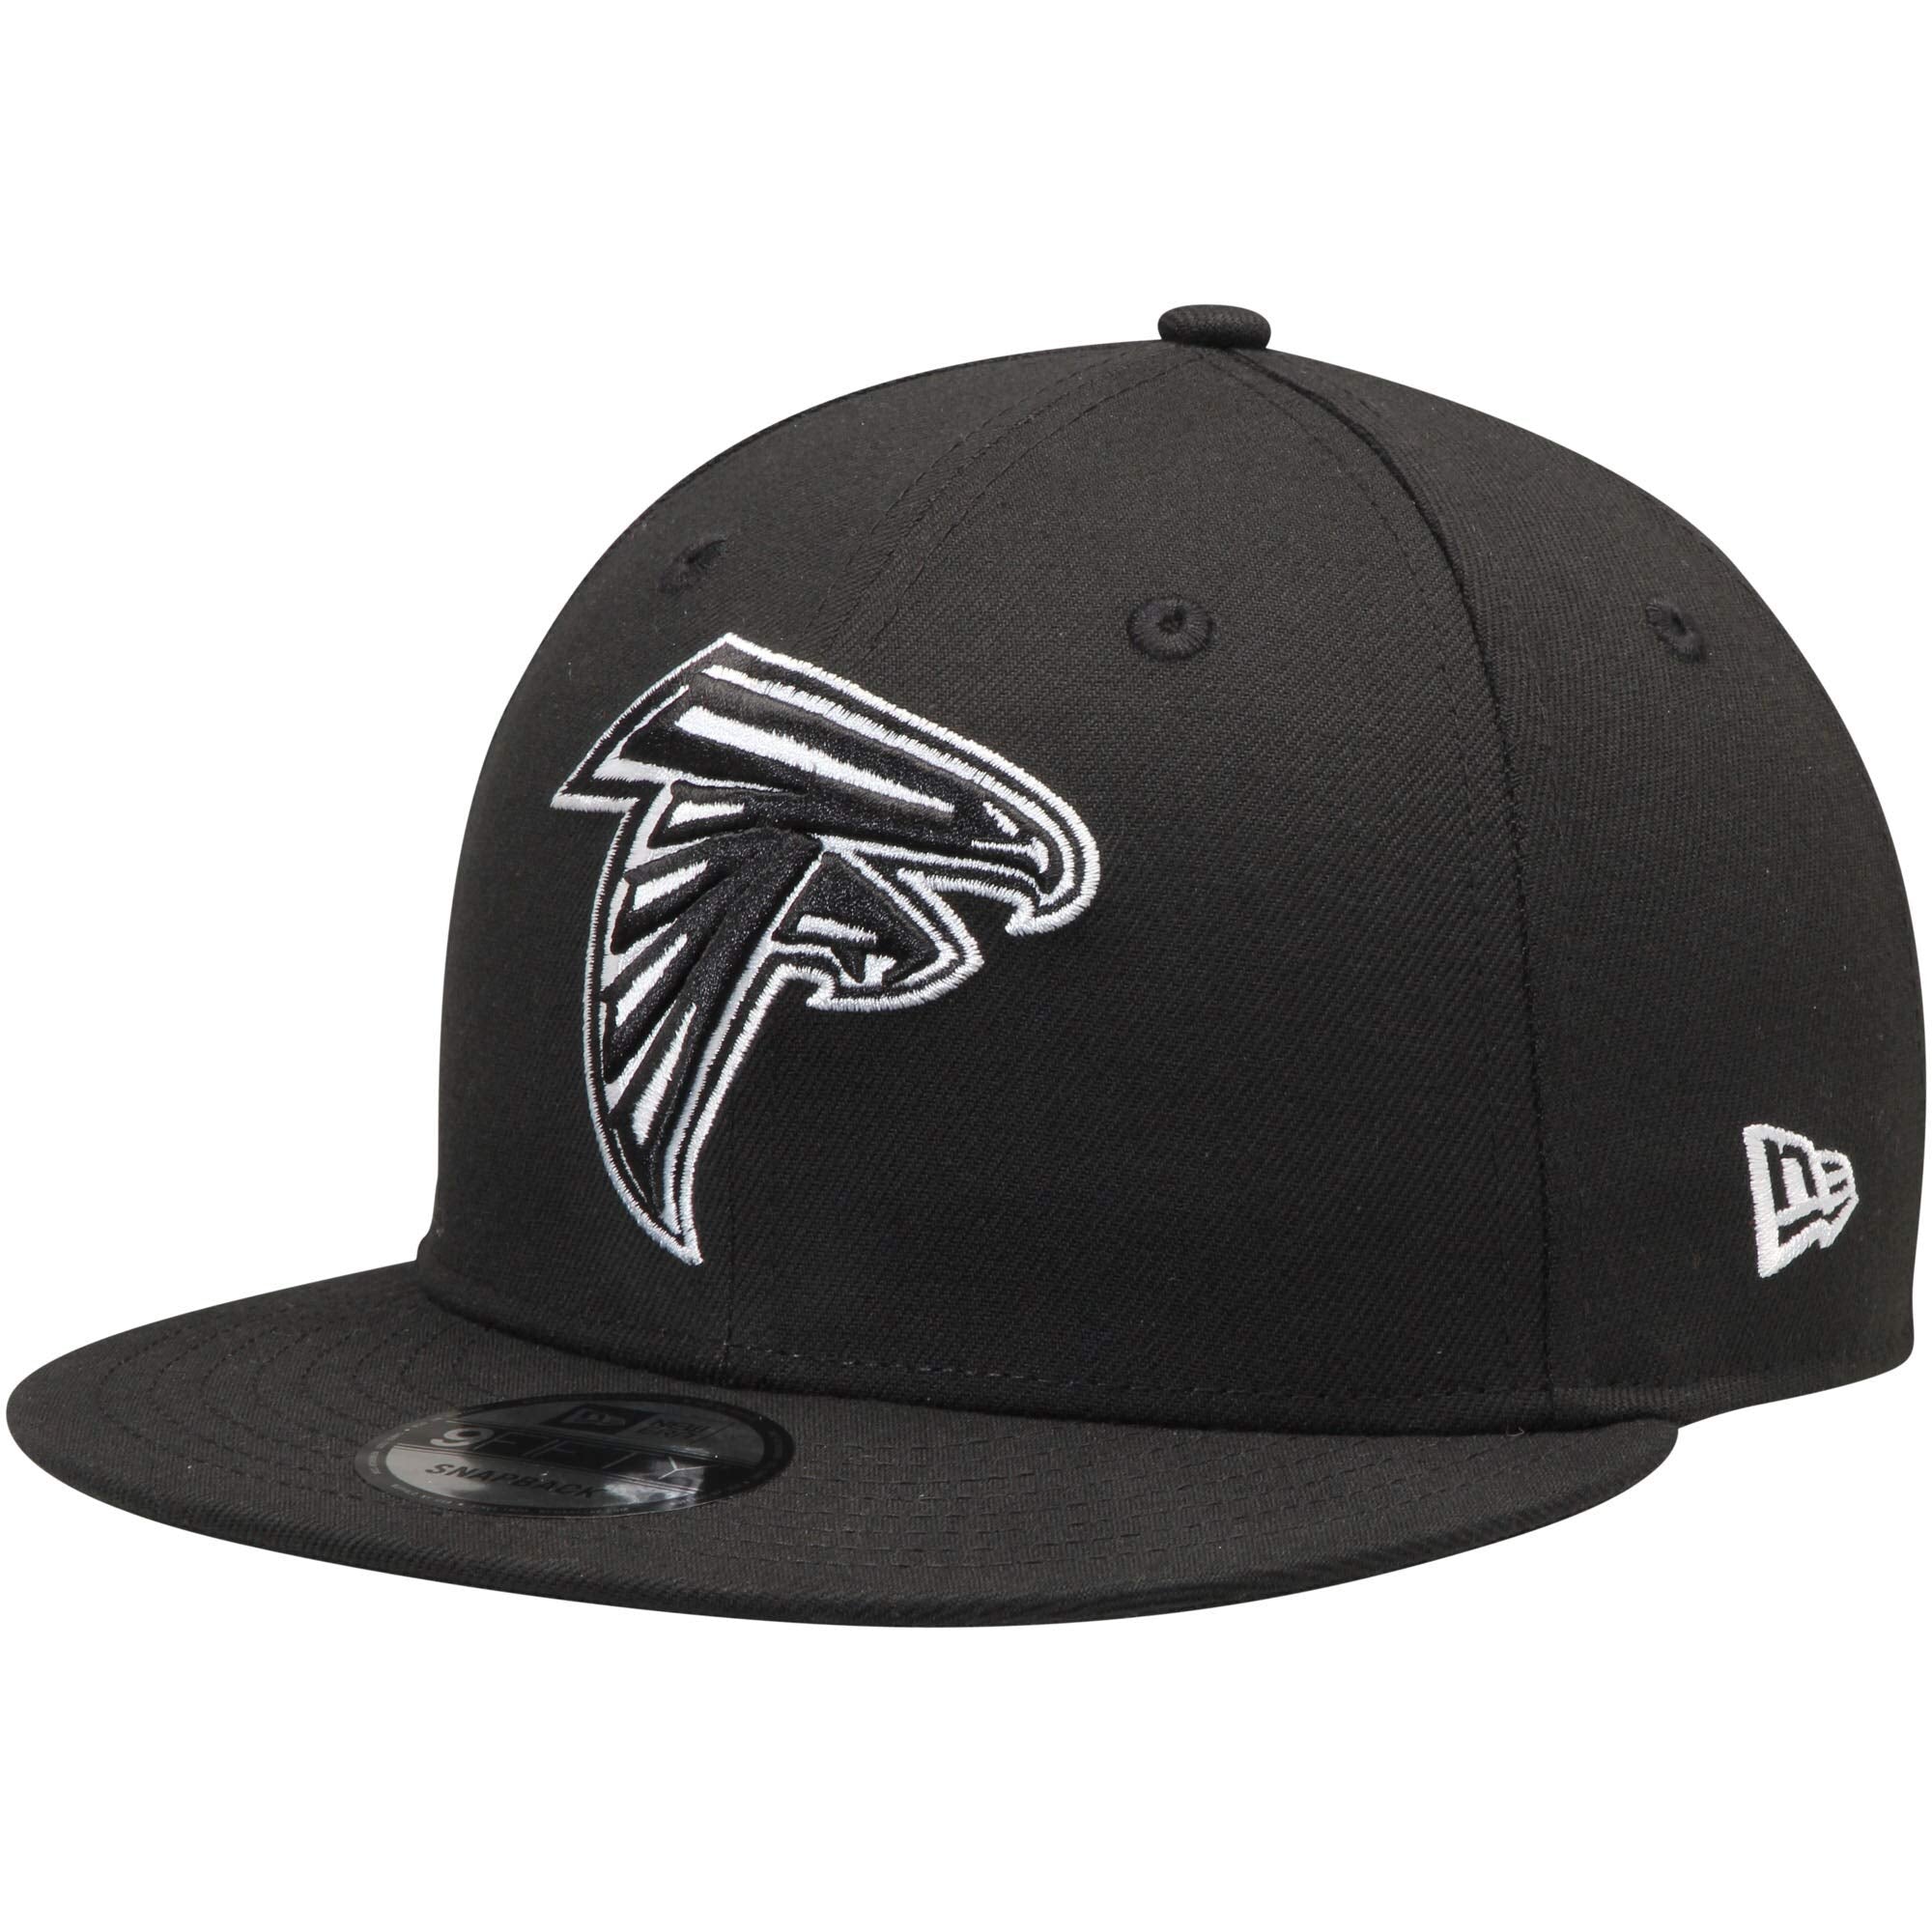 New Era NFL 9FIFTY Black White Adjustable Snapback Hat Cap One Size Fits All (Atlanta Falcons) - Caps Fitted Caps Fitted New Era